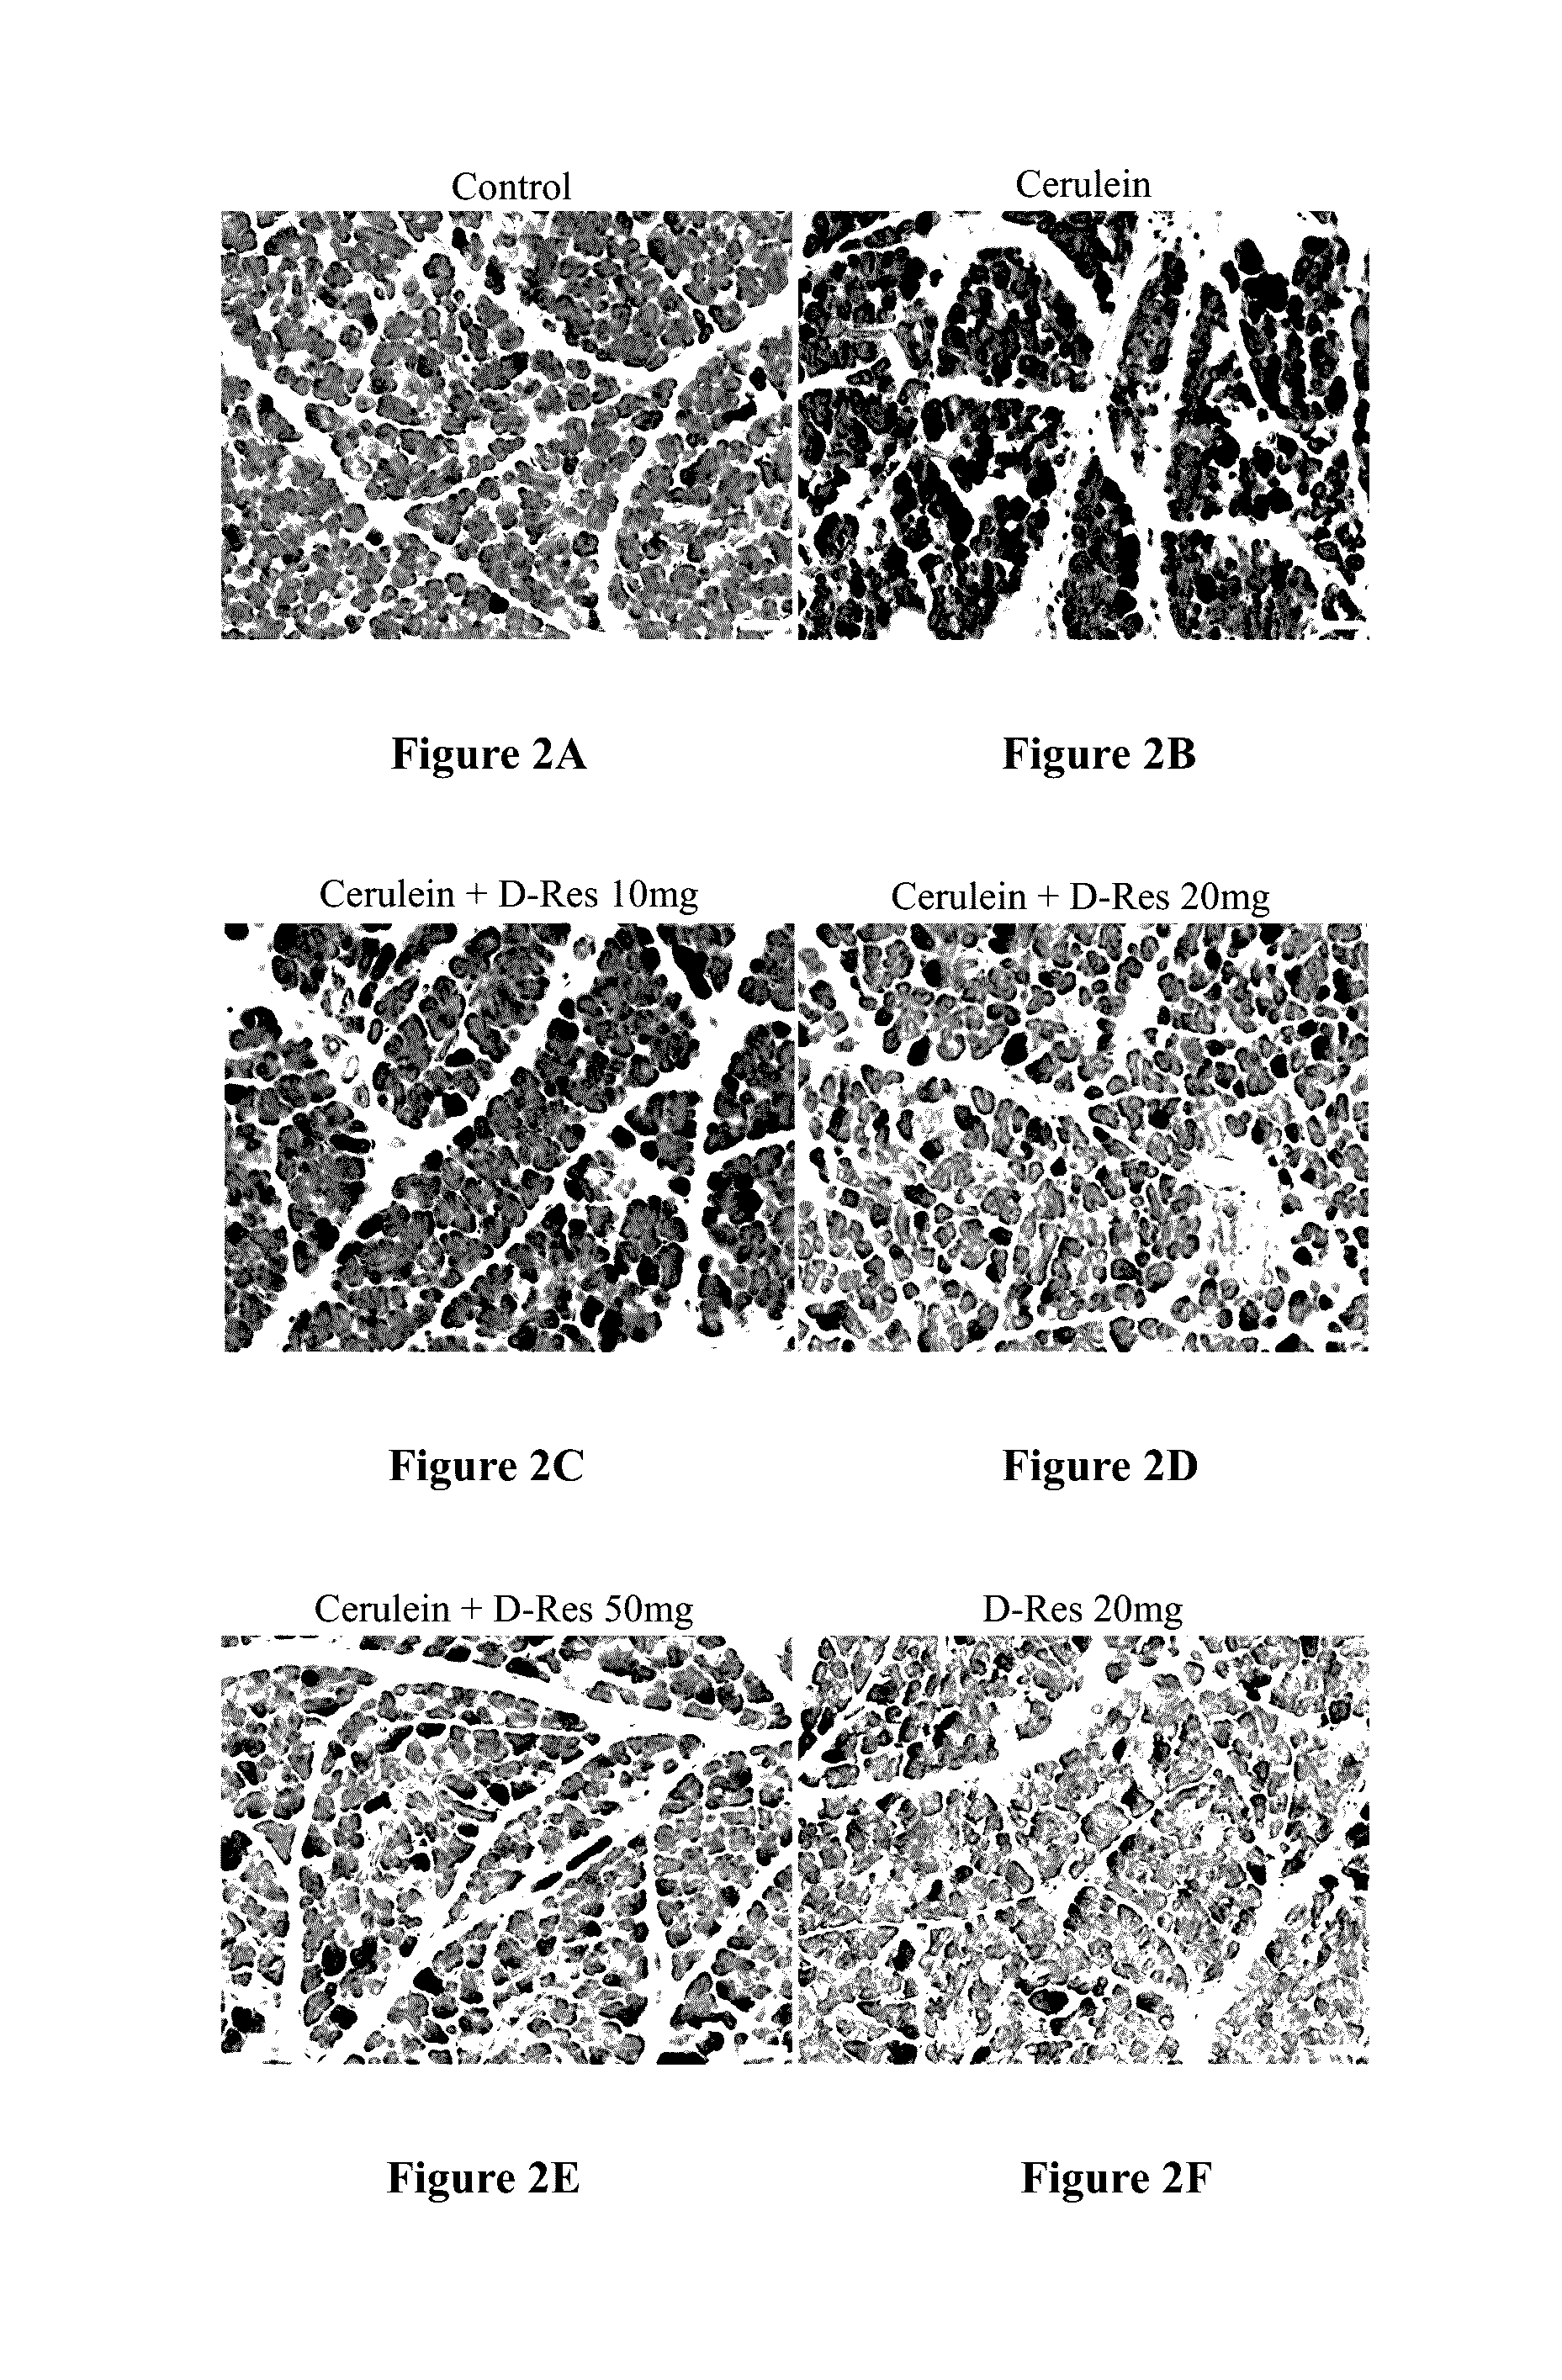 Skin-protection composition containing dendrobium-based ingredients